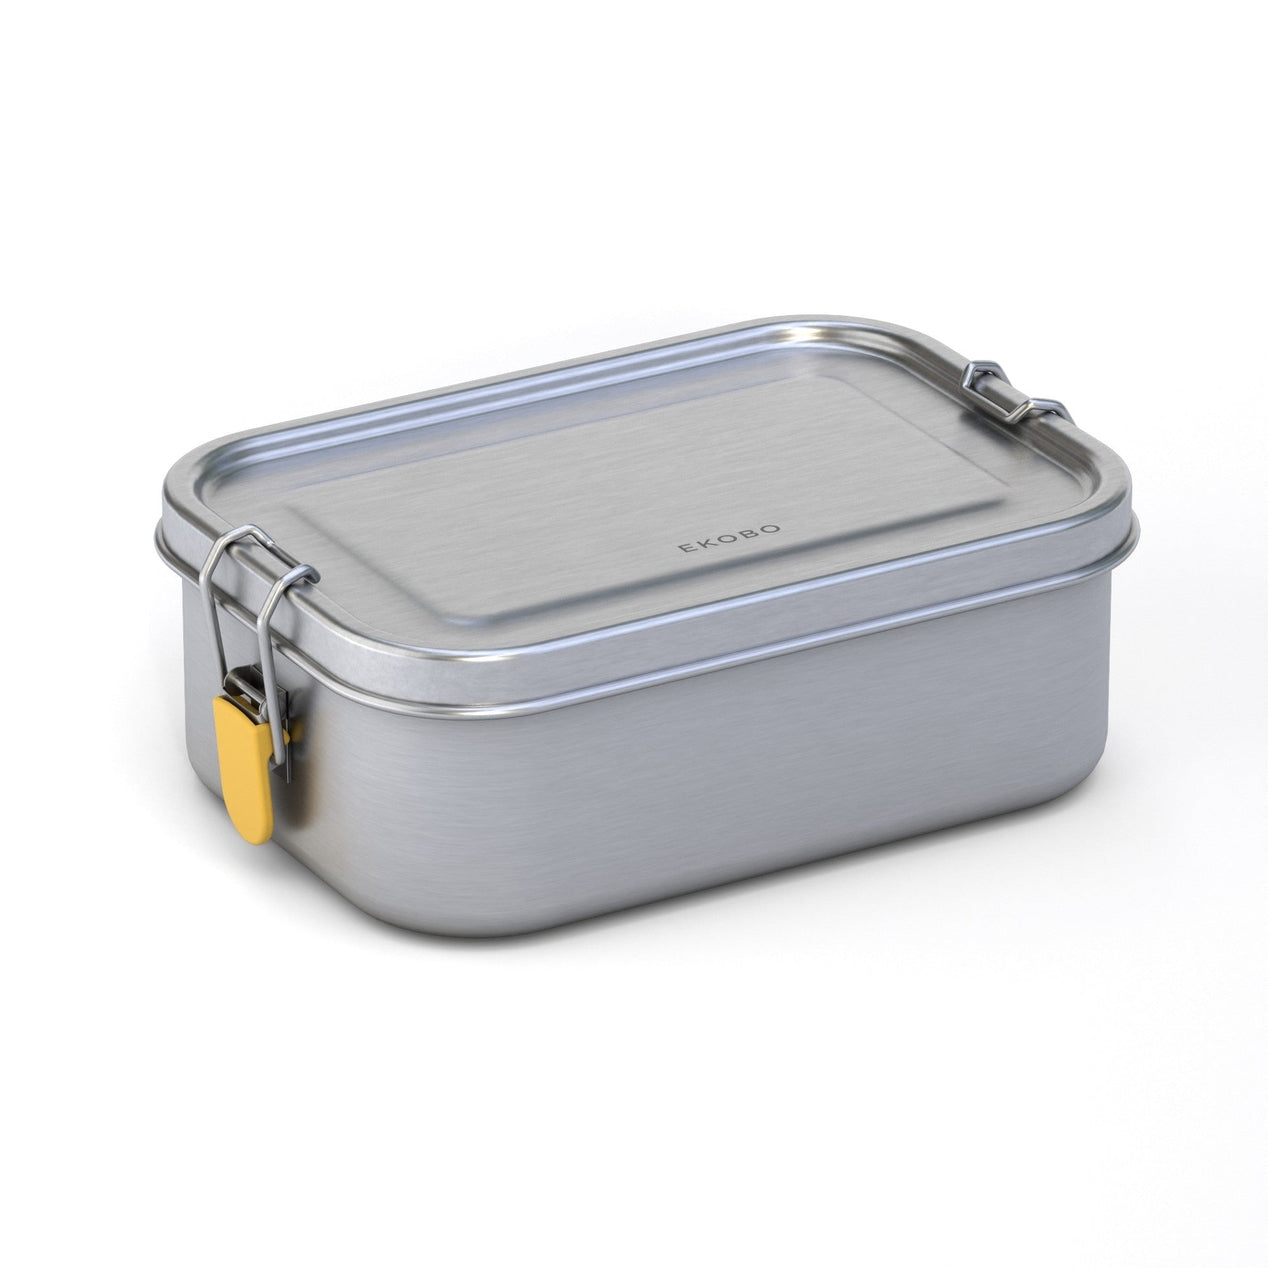 Stainless Steel Lunch Box with Heat Safe Insert